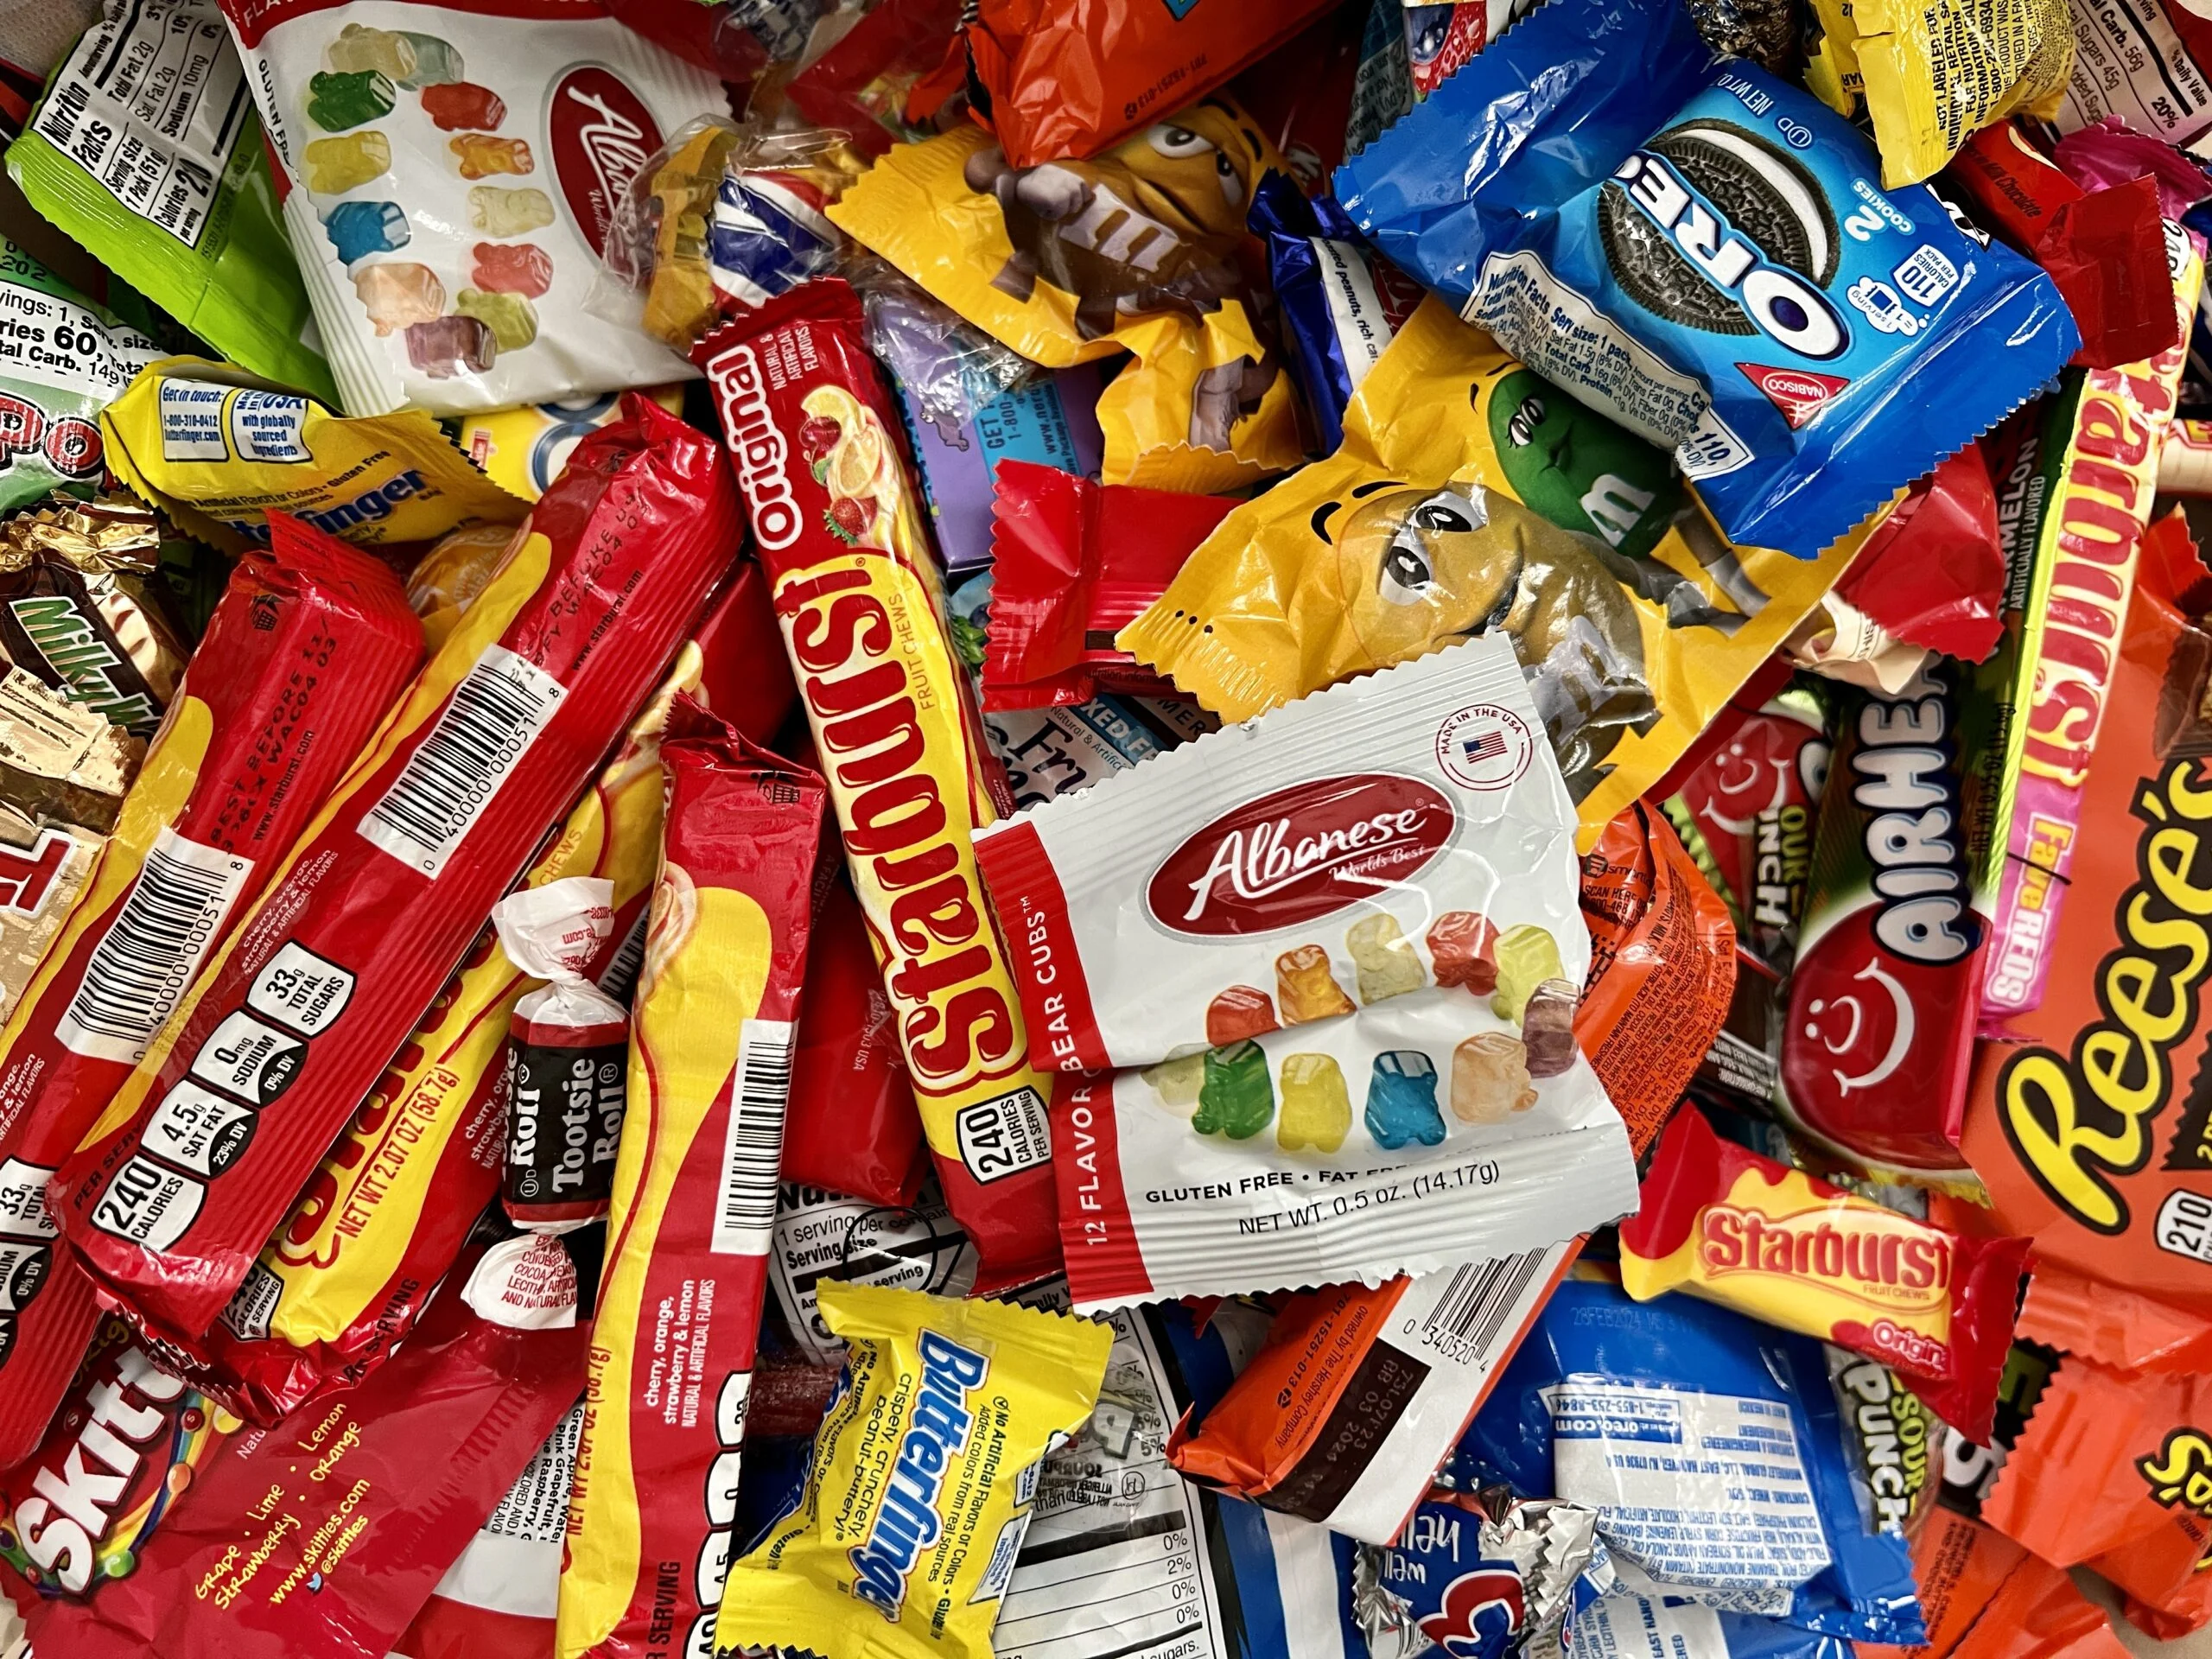 The Horrors of Halloween Candy - Finding Our Green Life